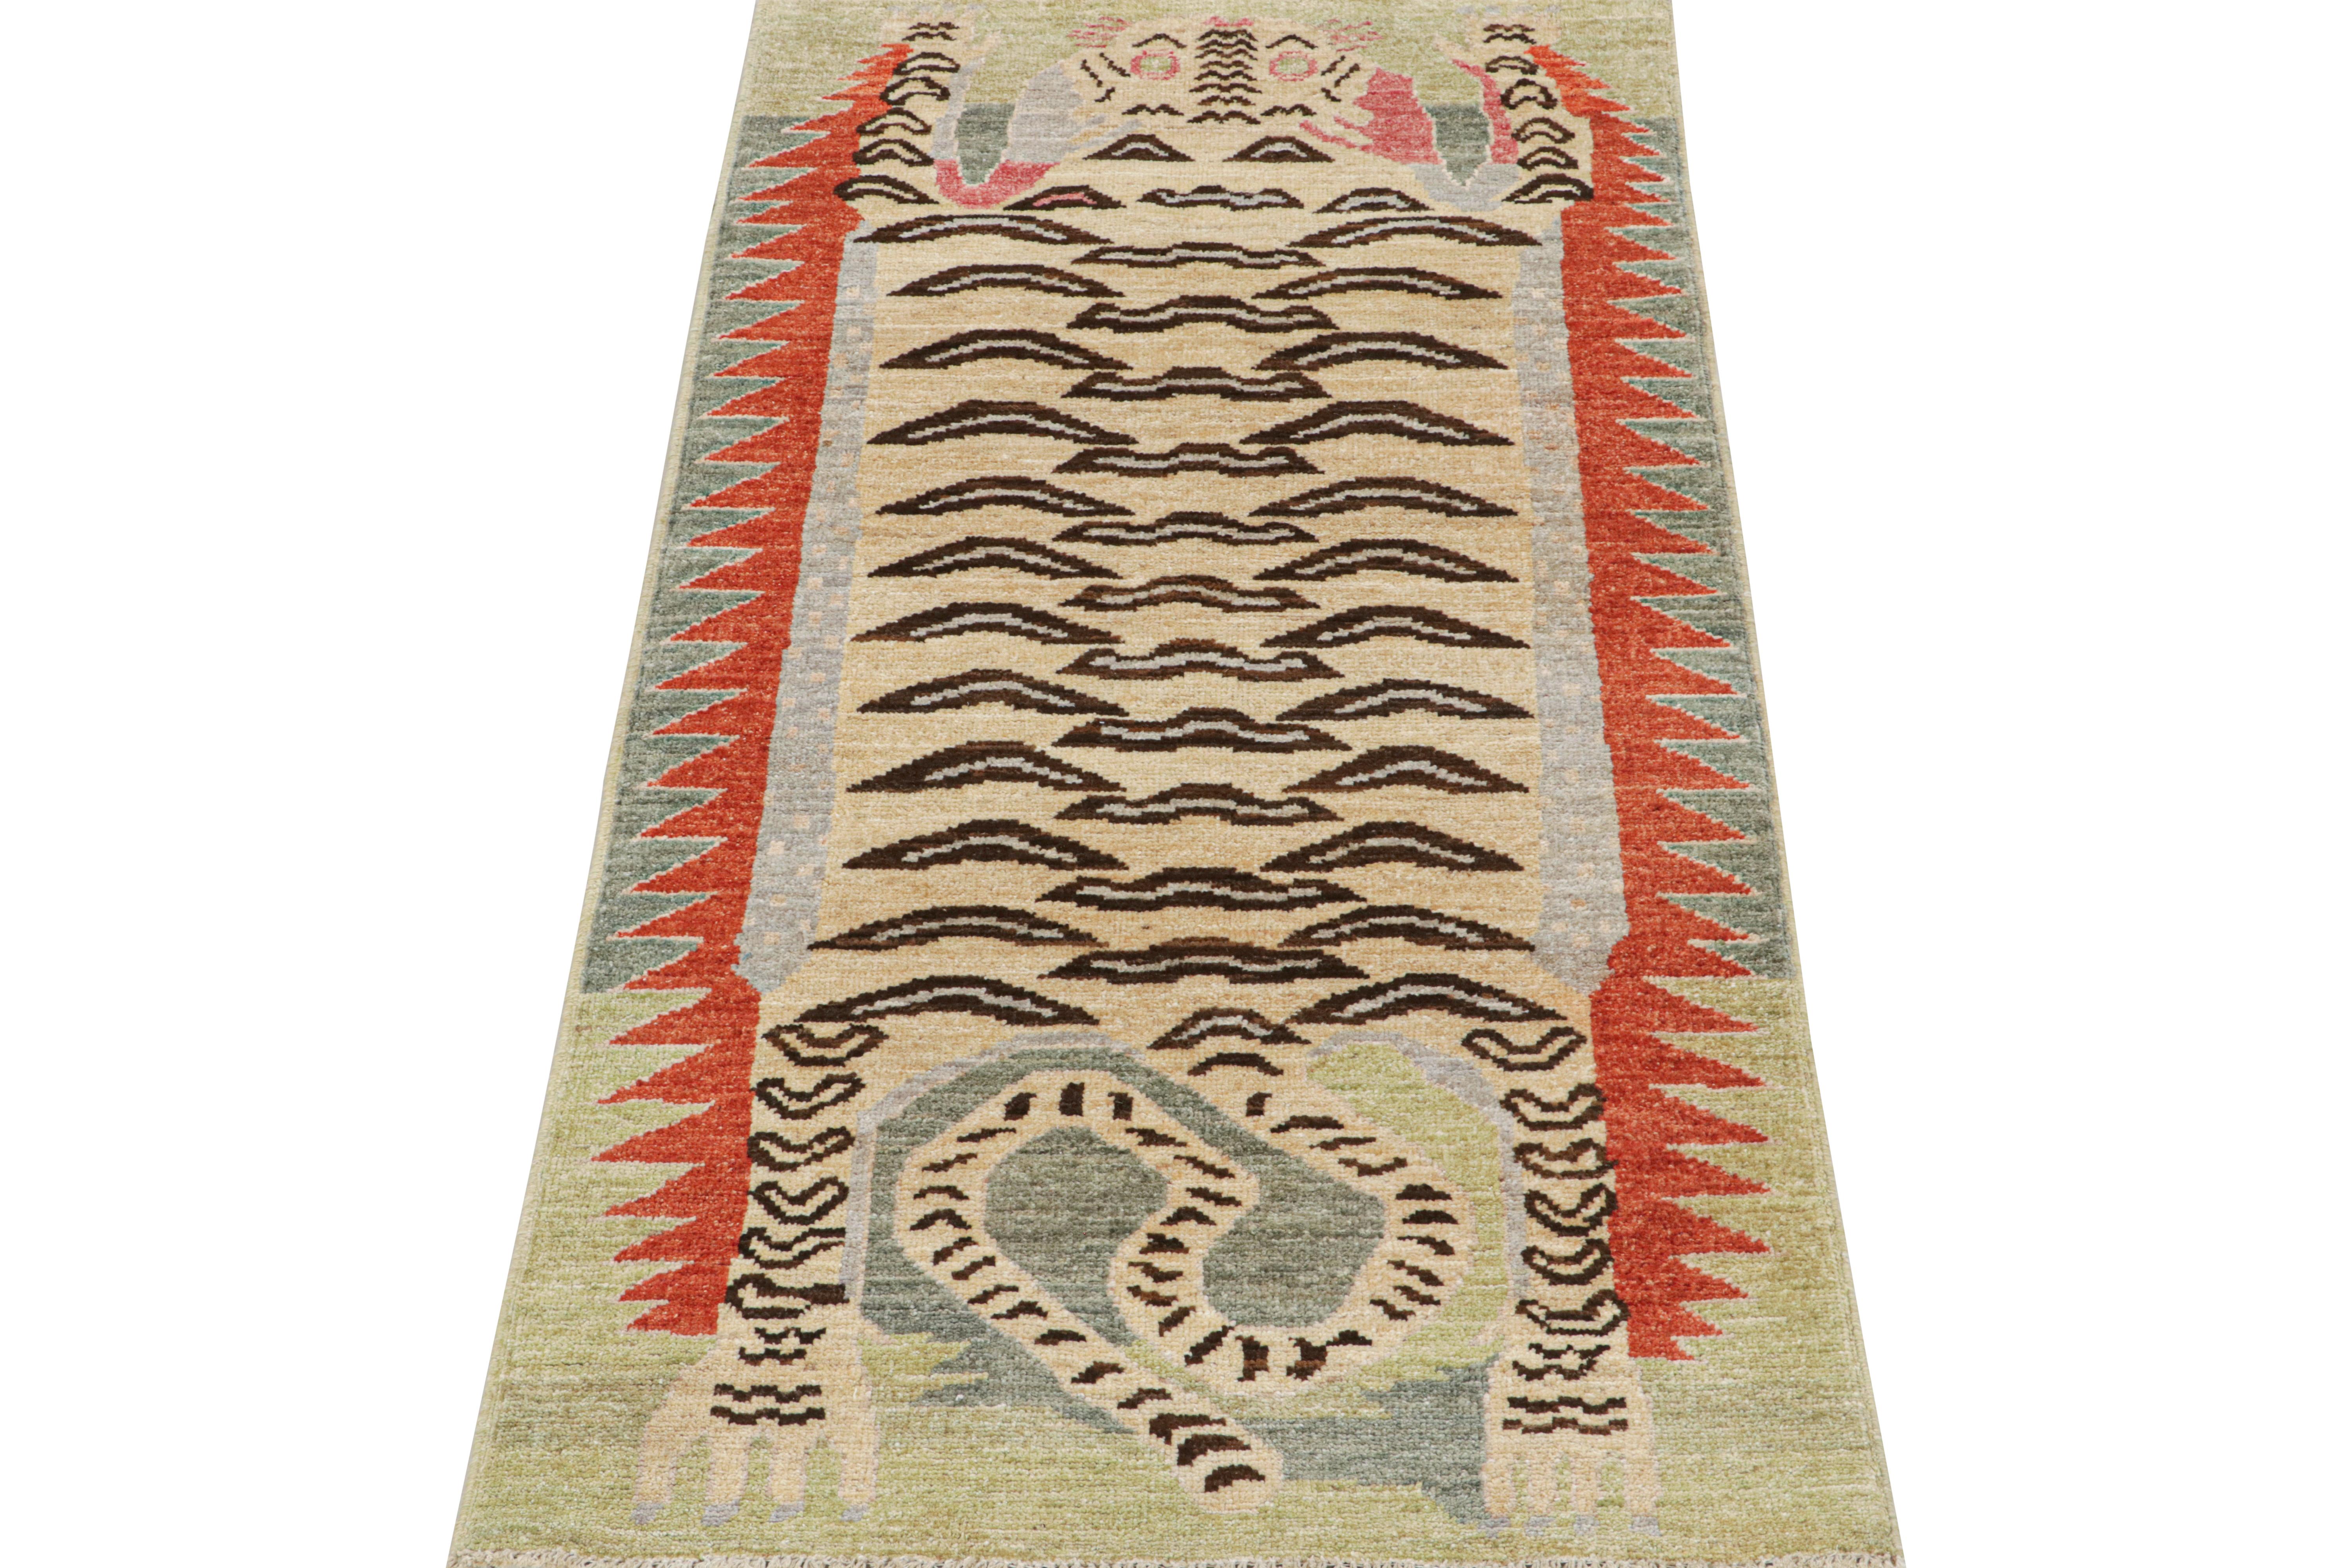 This contemporary 3x6 runner is a bold new addition to Rug & Kilim’s Tigers Collection. Our collection spans several cultures and recaptures iconic pictorial styles in folk art and handmade Oriental rugs alike.
Further on the Design:
This particular